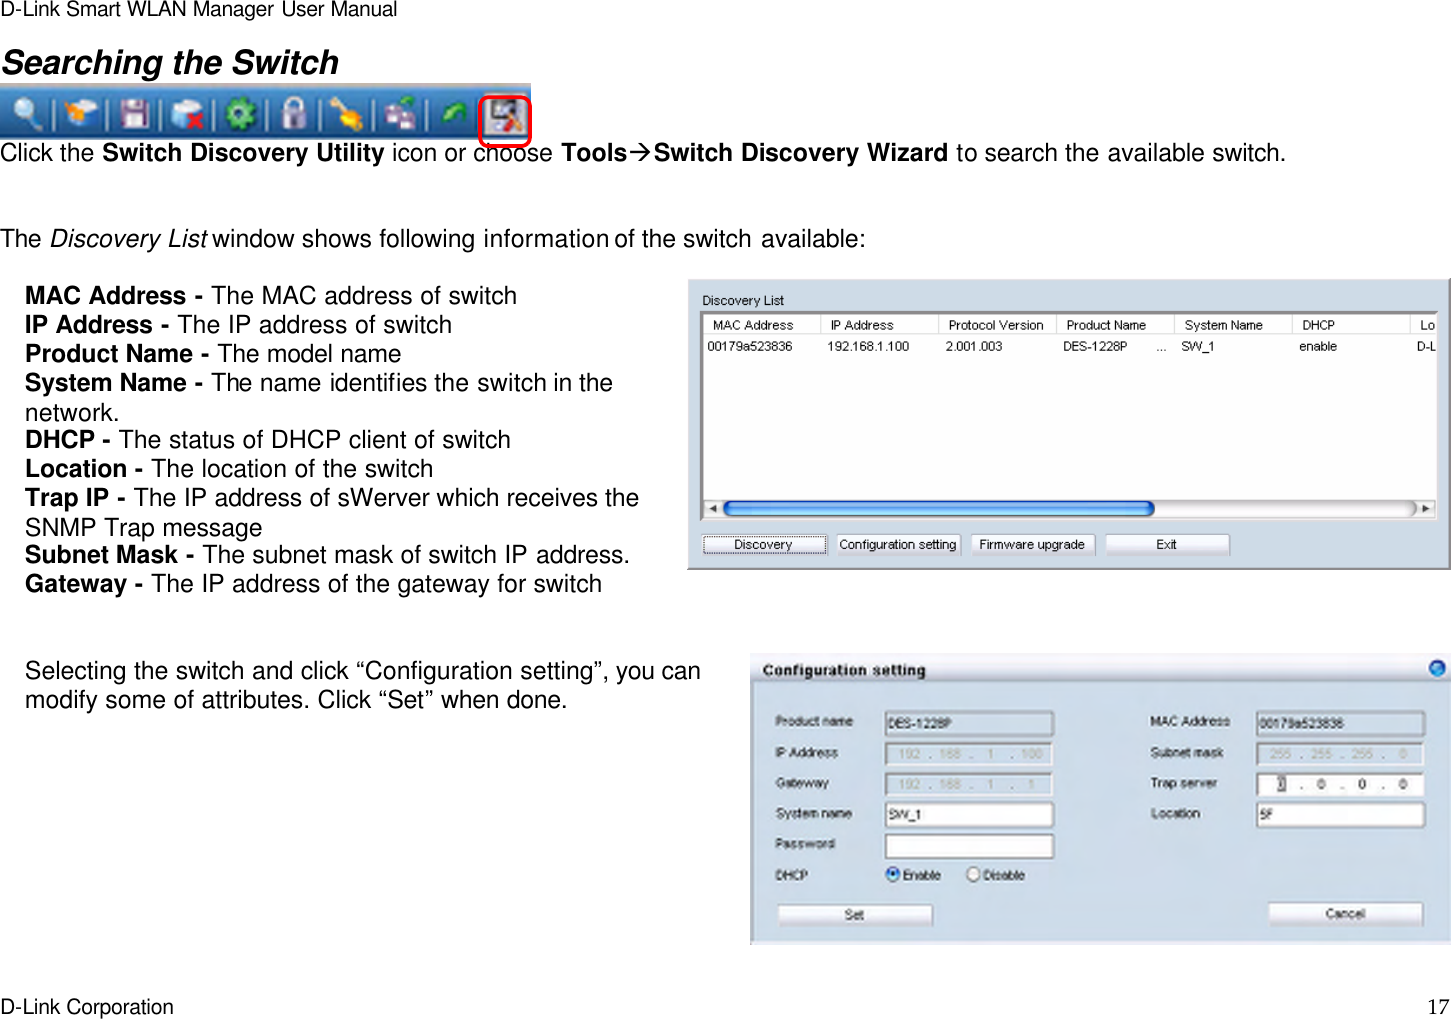 D-Link Smart WLAN Manager User Manual  D-Link Corporation    17  Searching the Switch  Click the Switch Discovery Utility icon or choose ToolsàSwitch Discovery Wizard to search the available switch.   The Discovery List window shows following information of the switch available:    MAC Address - The MAC address of switch IP Address - The IP address of switch Product Name - The model name System Name - The name identifies the switch in the network. DHCP - The status of DHCP client of switch Location - The location of the switch Trap IP - The IP address of sWerver which receives the SNMP Trap message Subnet Mask - The subnet mask of switch IP address. Gateway - The IP address of the gateway for switch   Selecting the switch and click “Configuration setting”, you can modify some of attributes. Click “Set” when done.   